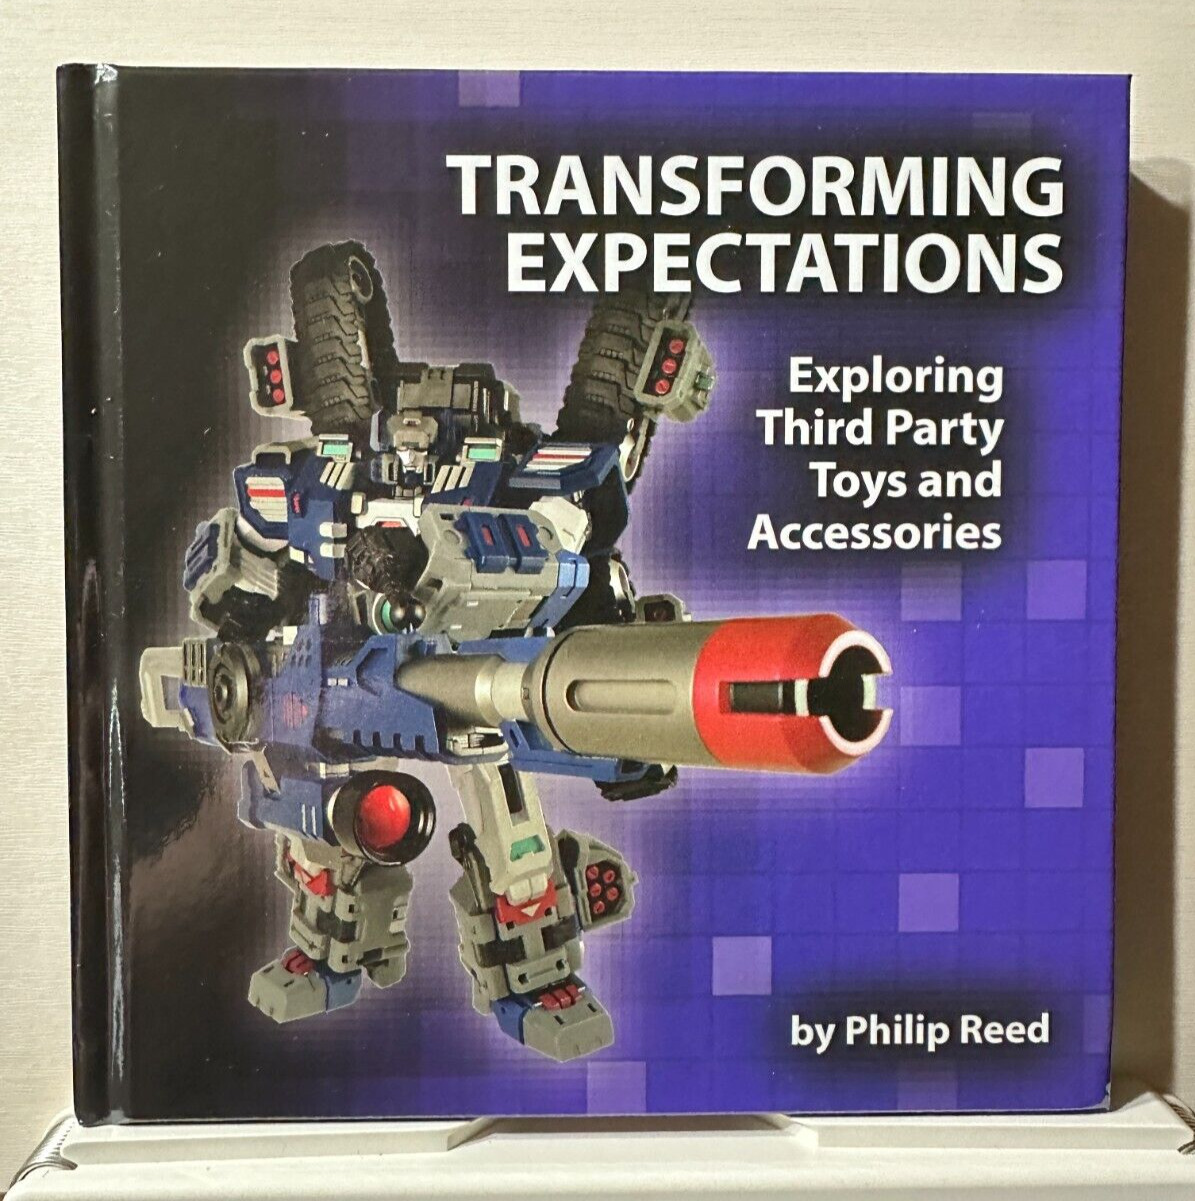 Transformers Third Party Toy Book - Transforming Expectations by Philip Reed